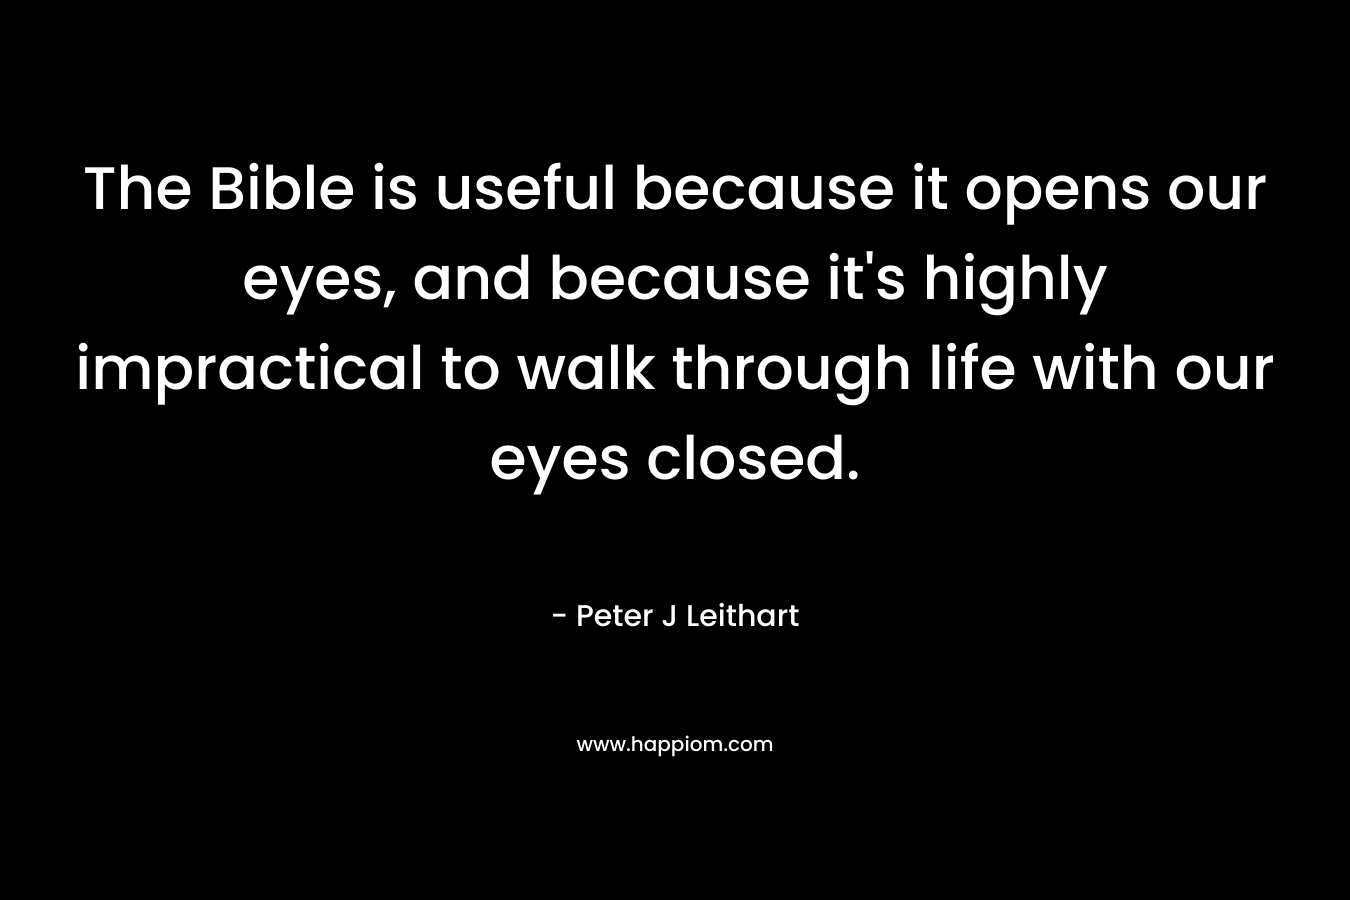 The Bible is useful because it opens our eyes, and because it's highly impractical to walk through life with our eyes closed.